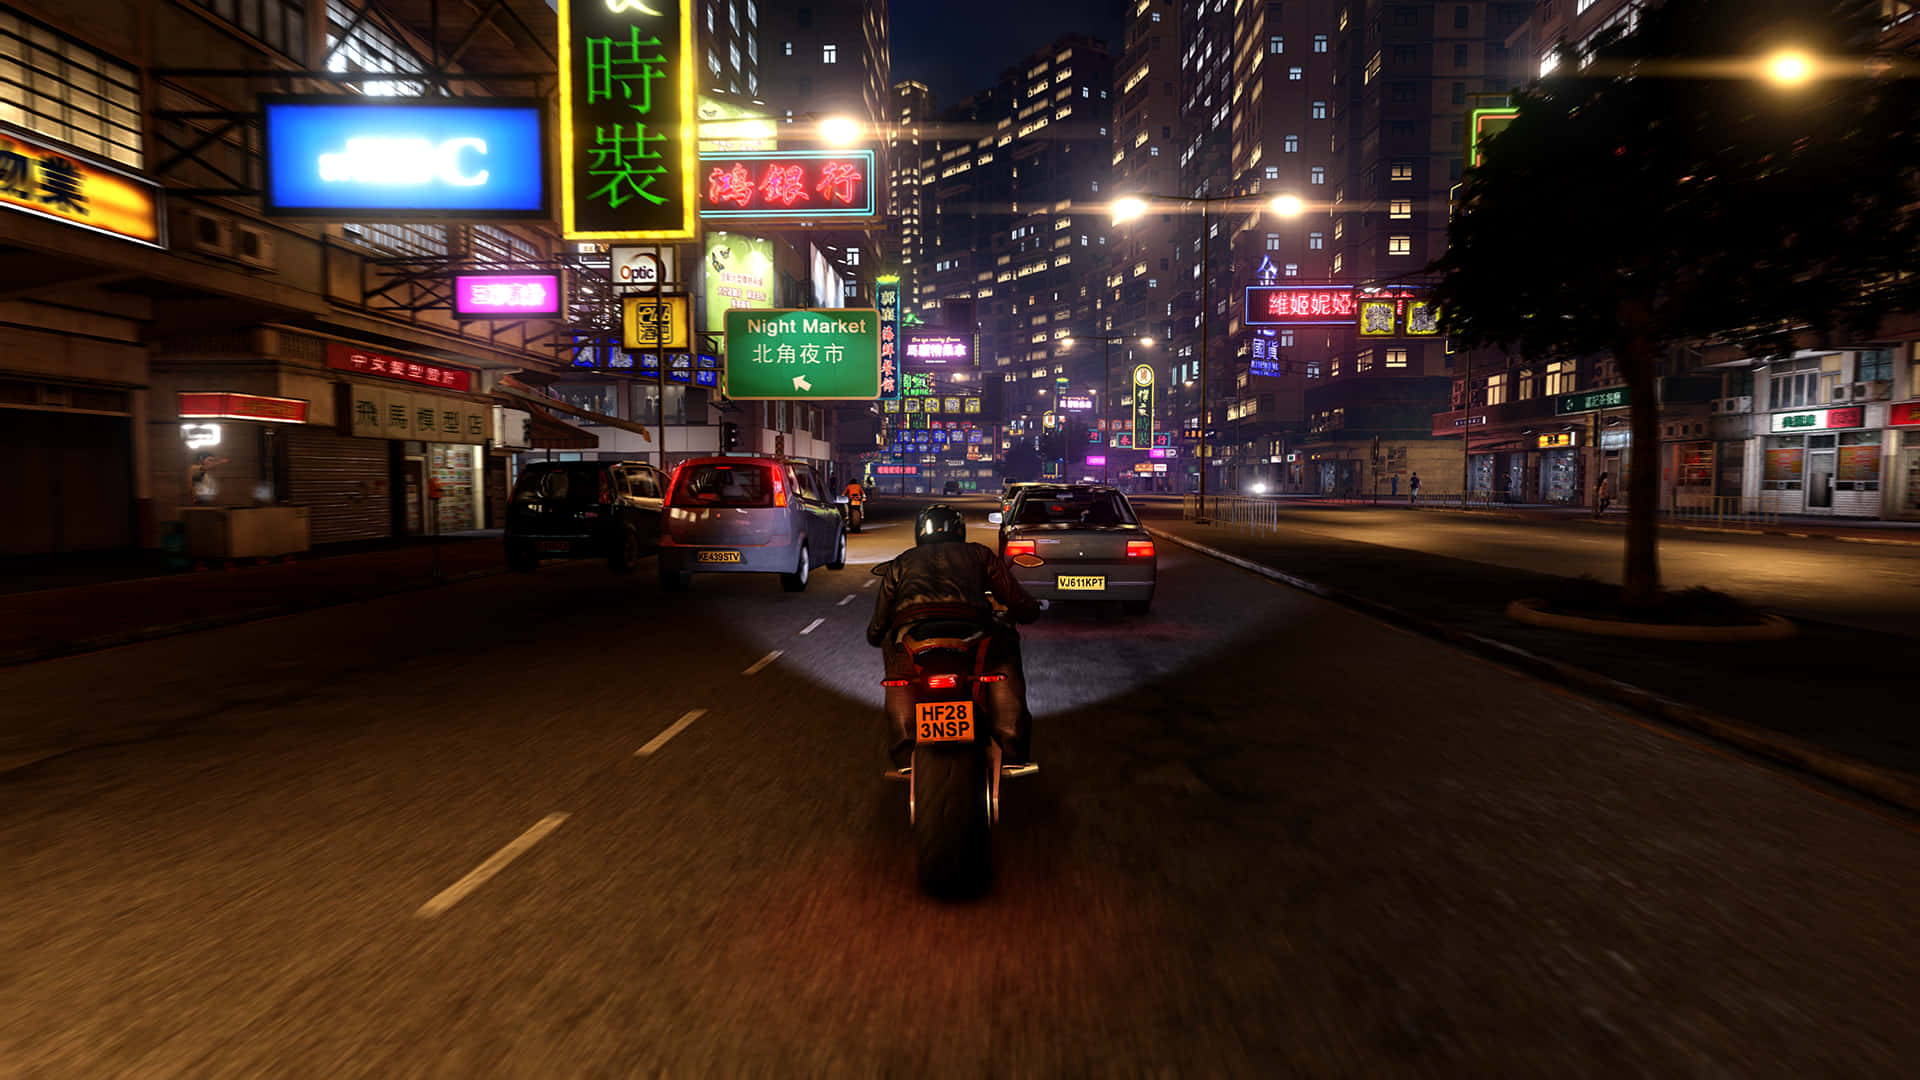 Explore the streets of Hong Kong with protagonist Wei Shen in Sleeping Dogs 2 Wallpaper